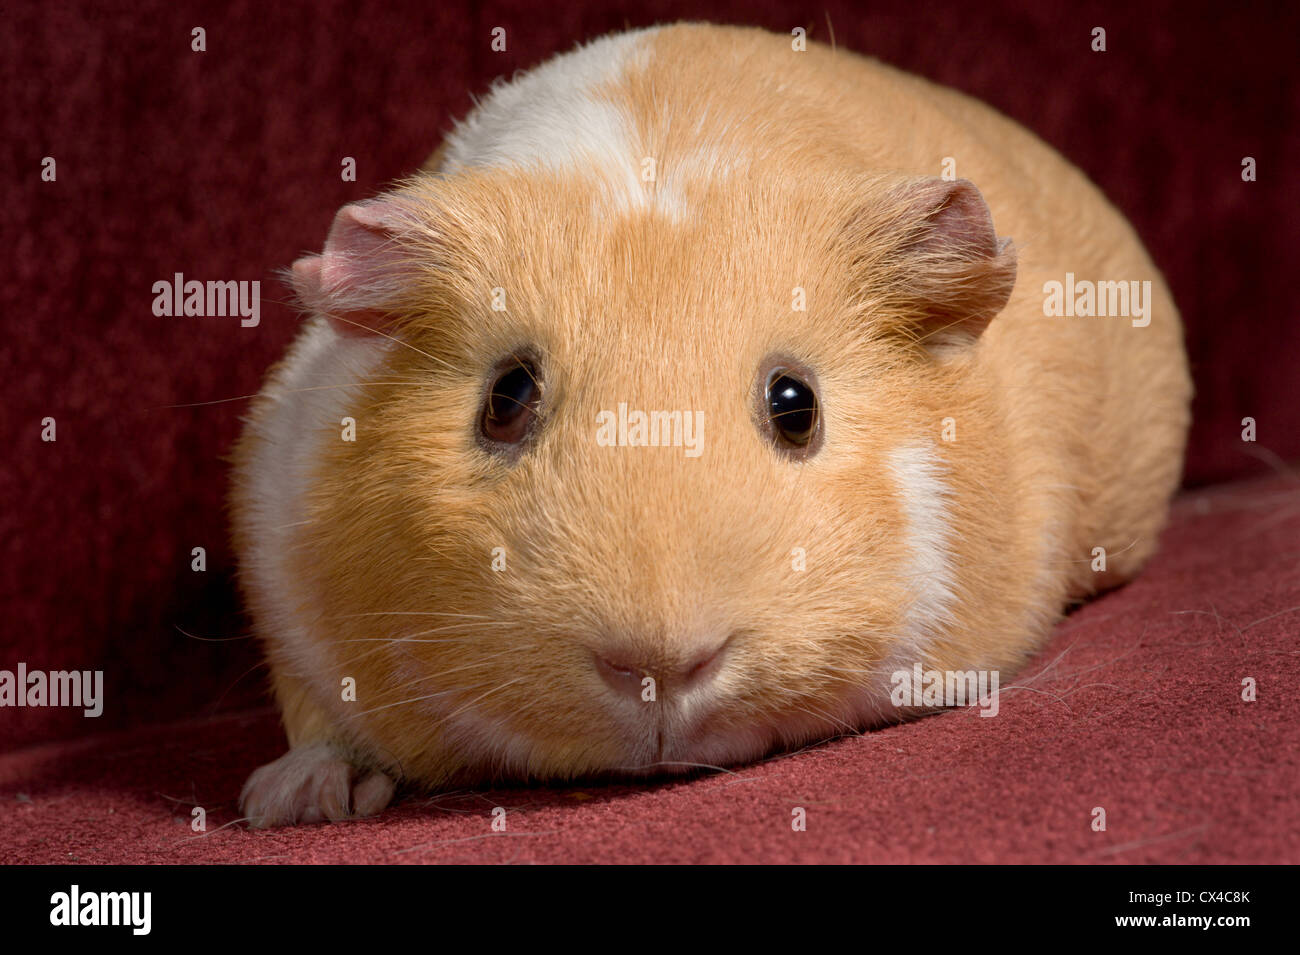 Chubby orange and white guinea pig sits on a red couch cushion Stock Photo  - Alamy